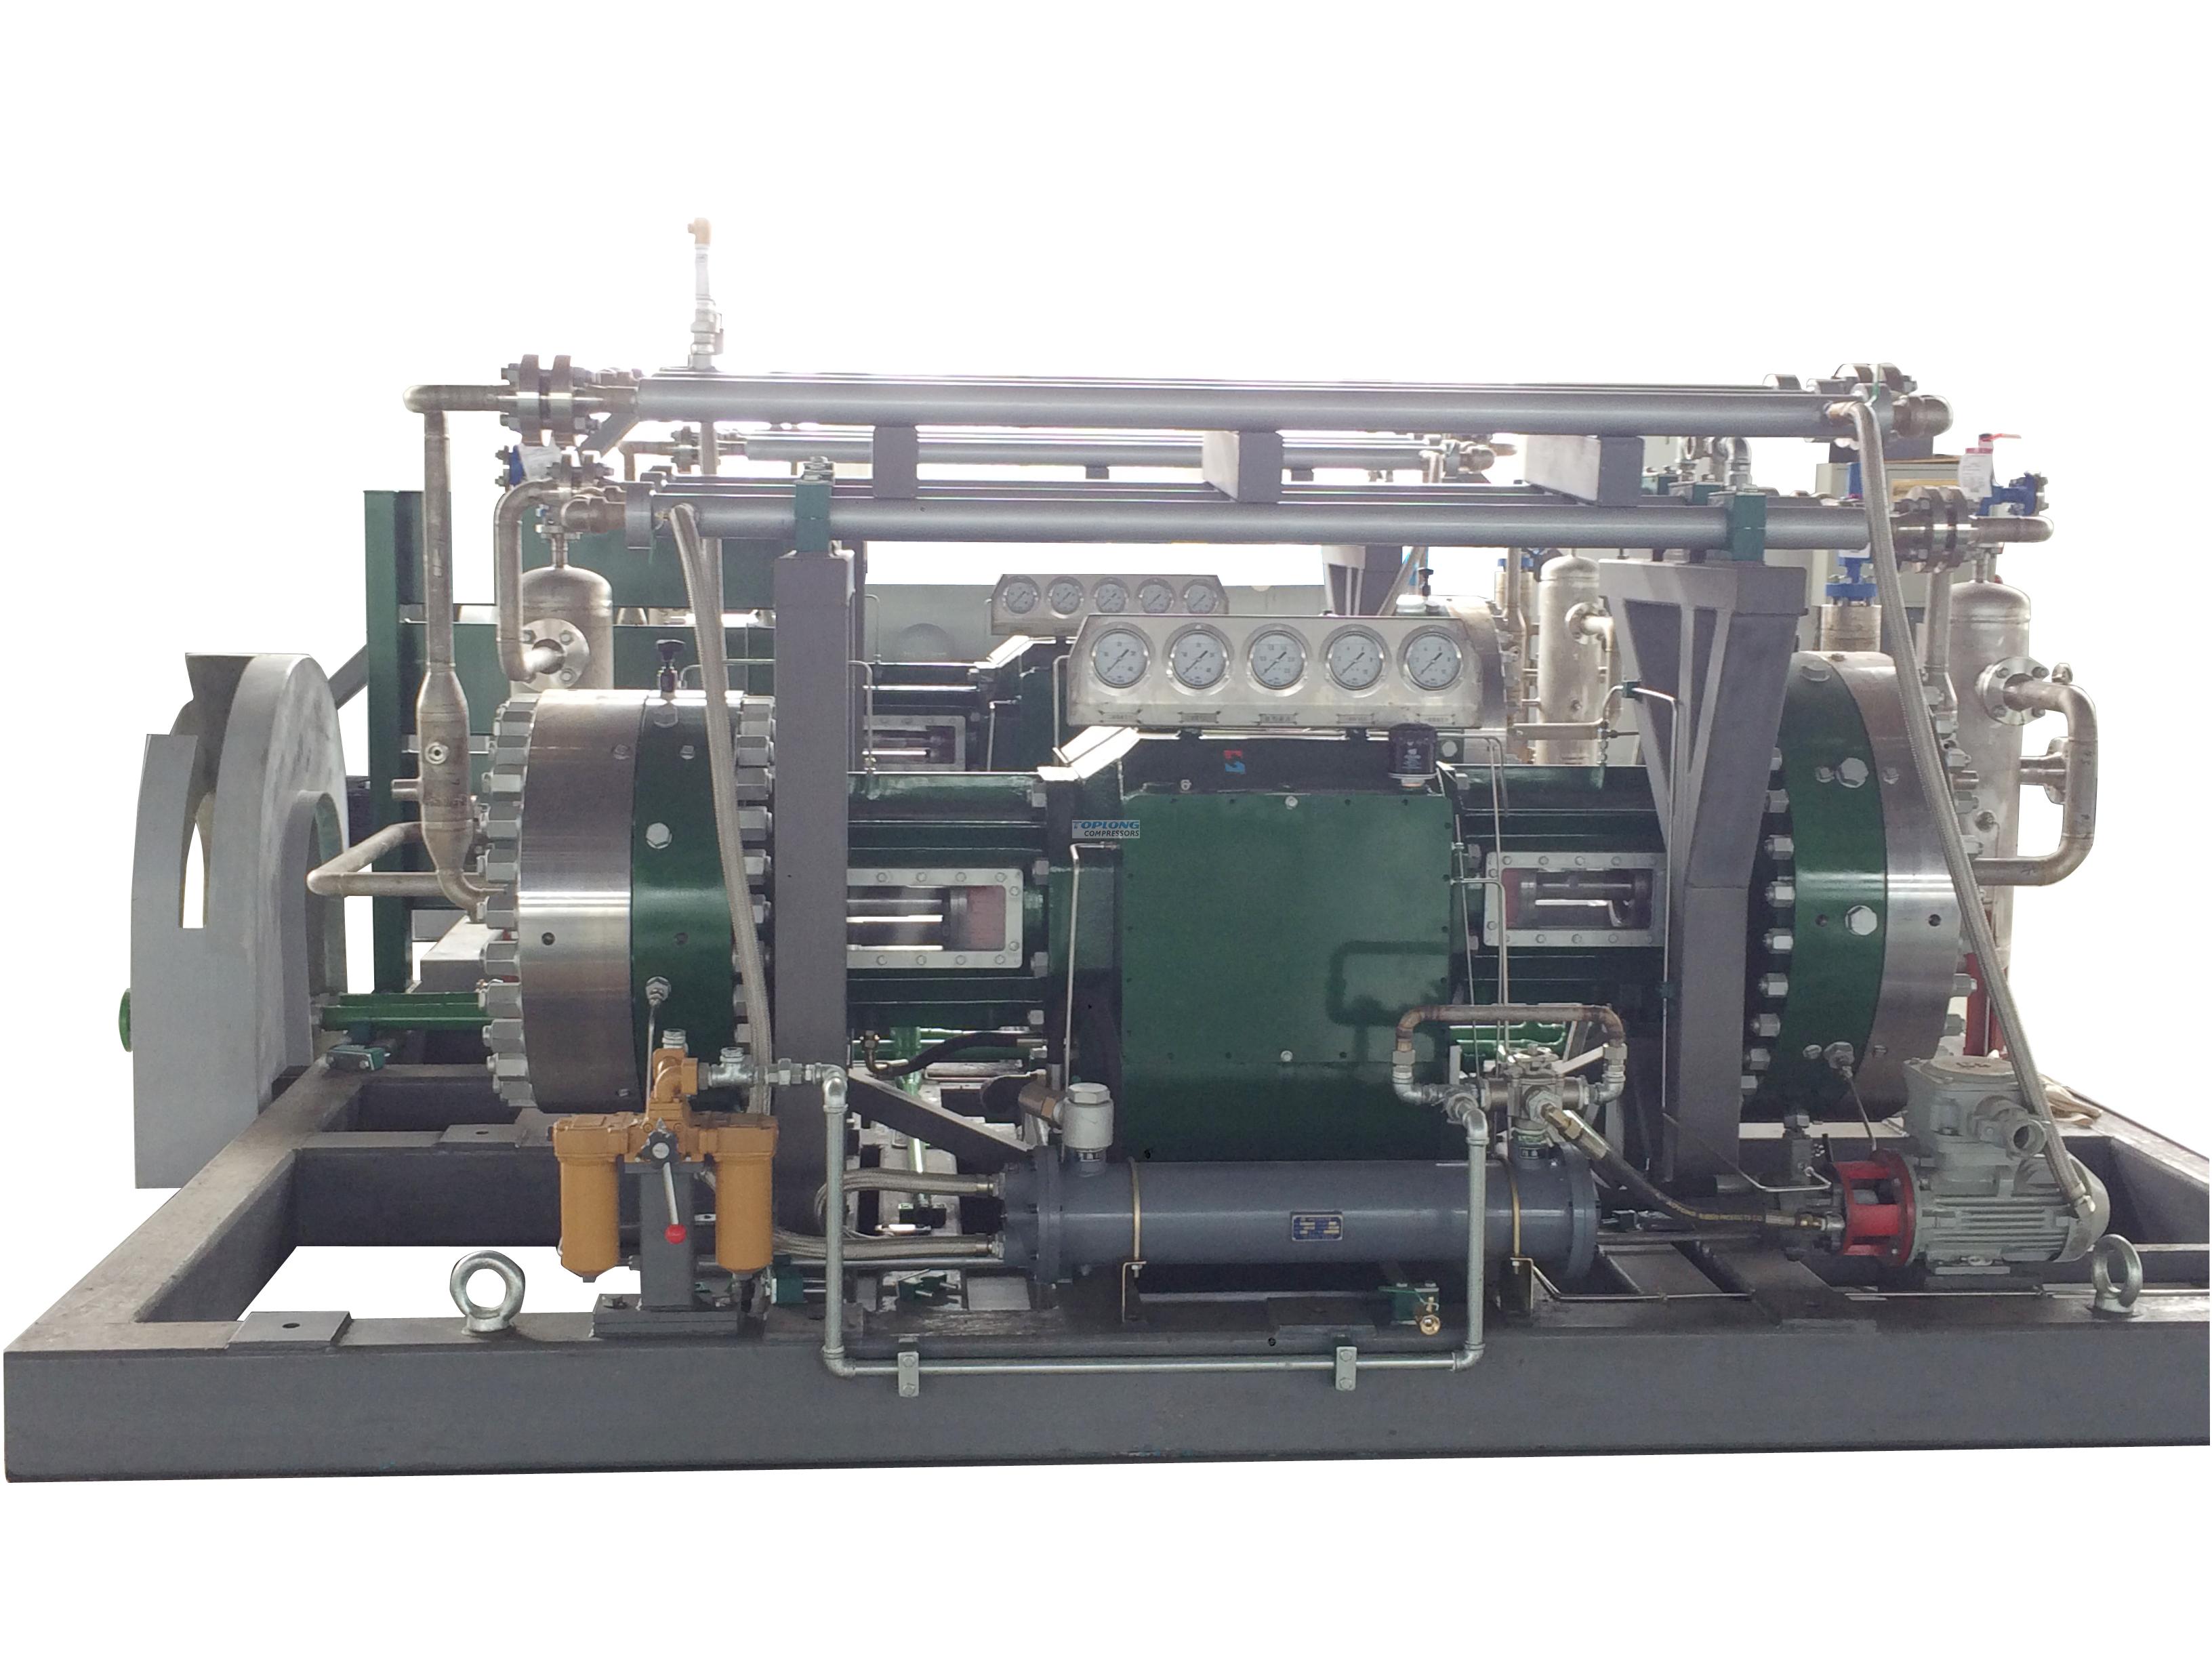 Do you know the working cycle process of the diaphragm compressor?